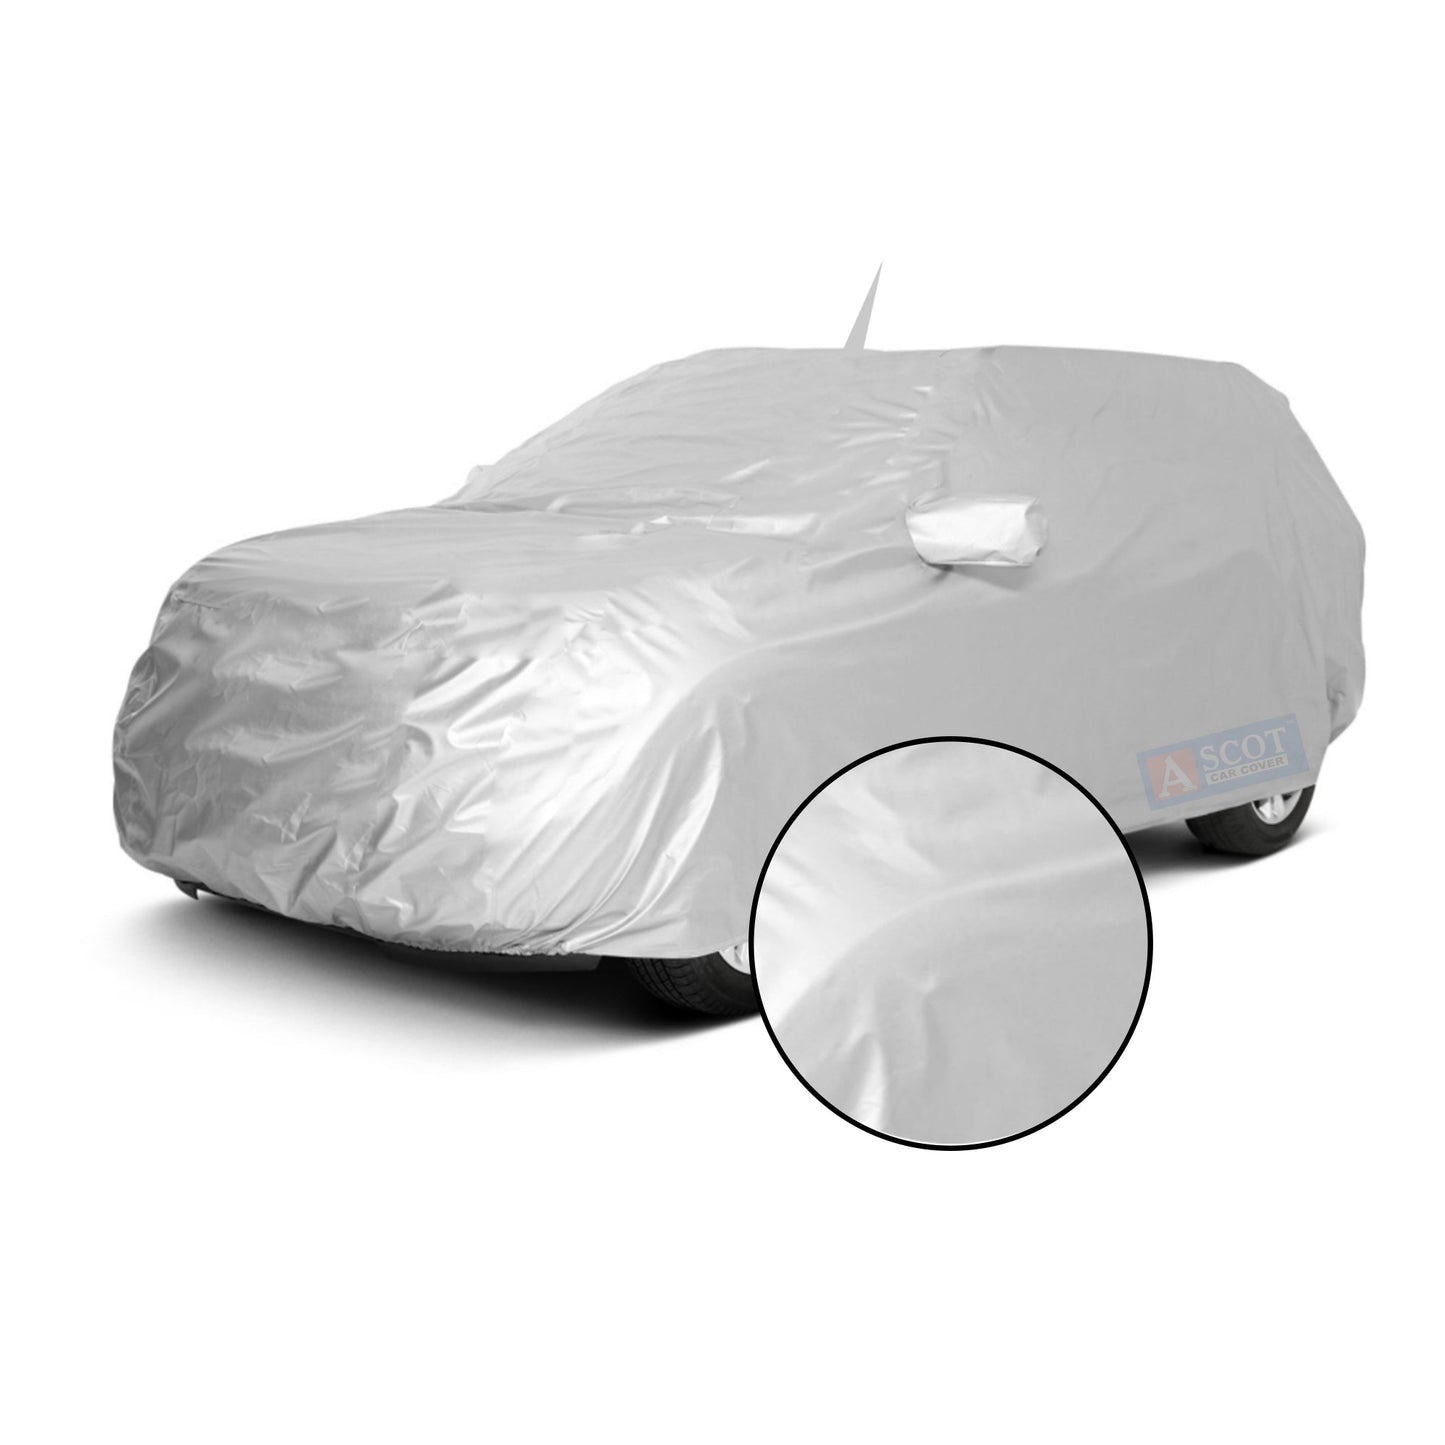 Ascot MG Gloster Car Body Cover Dust Proof, Trippel Stitched